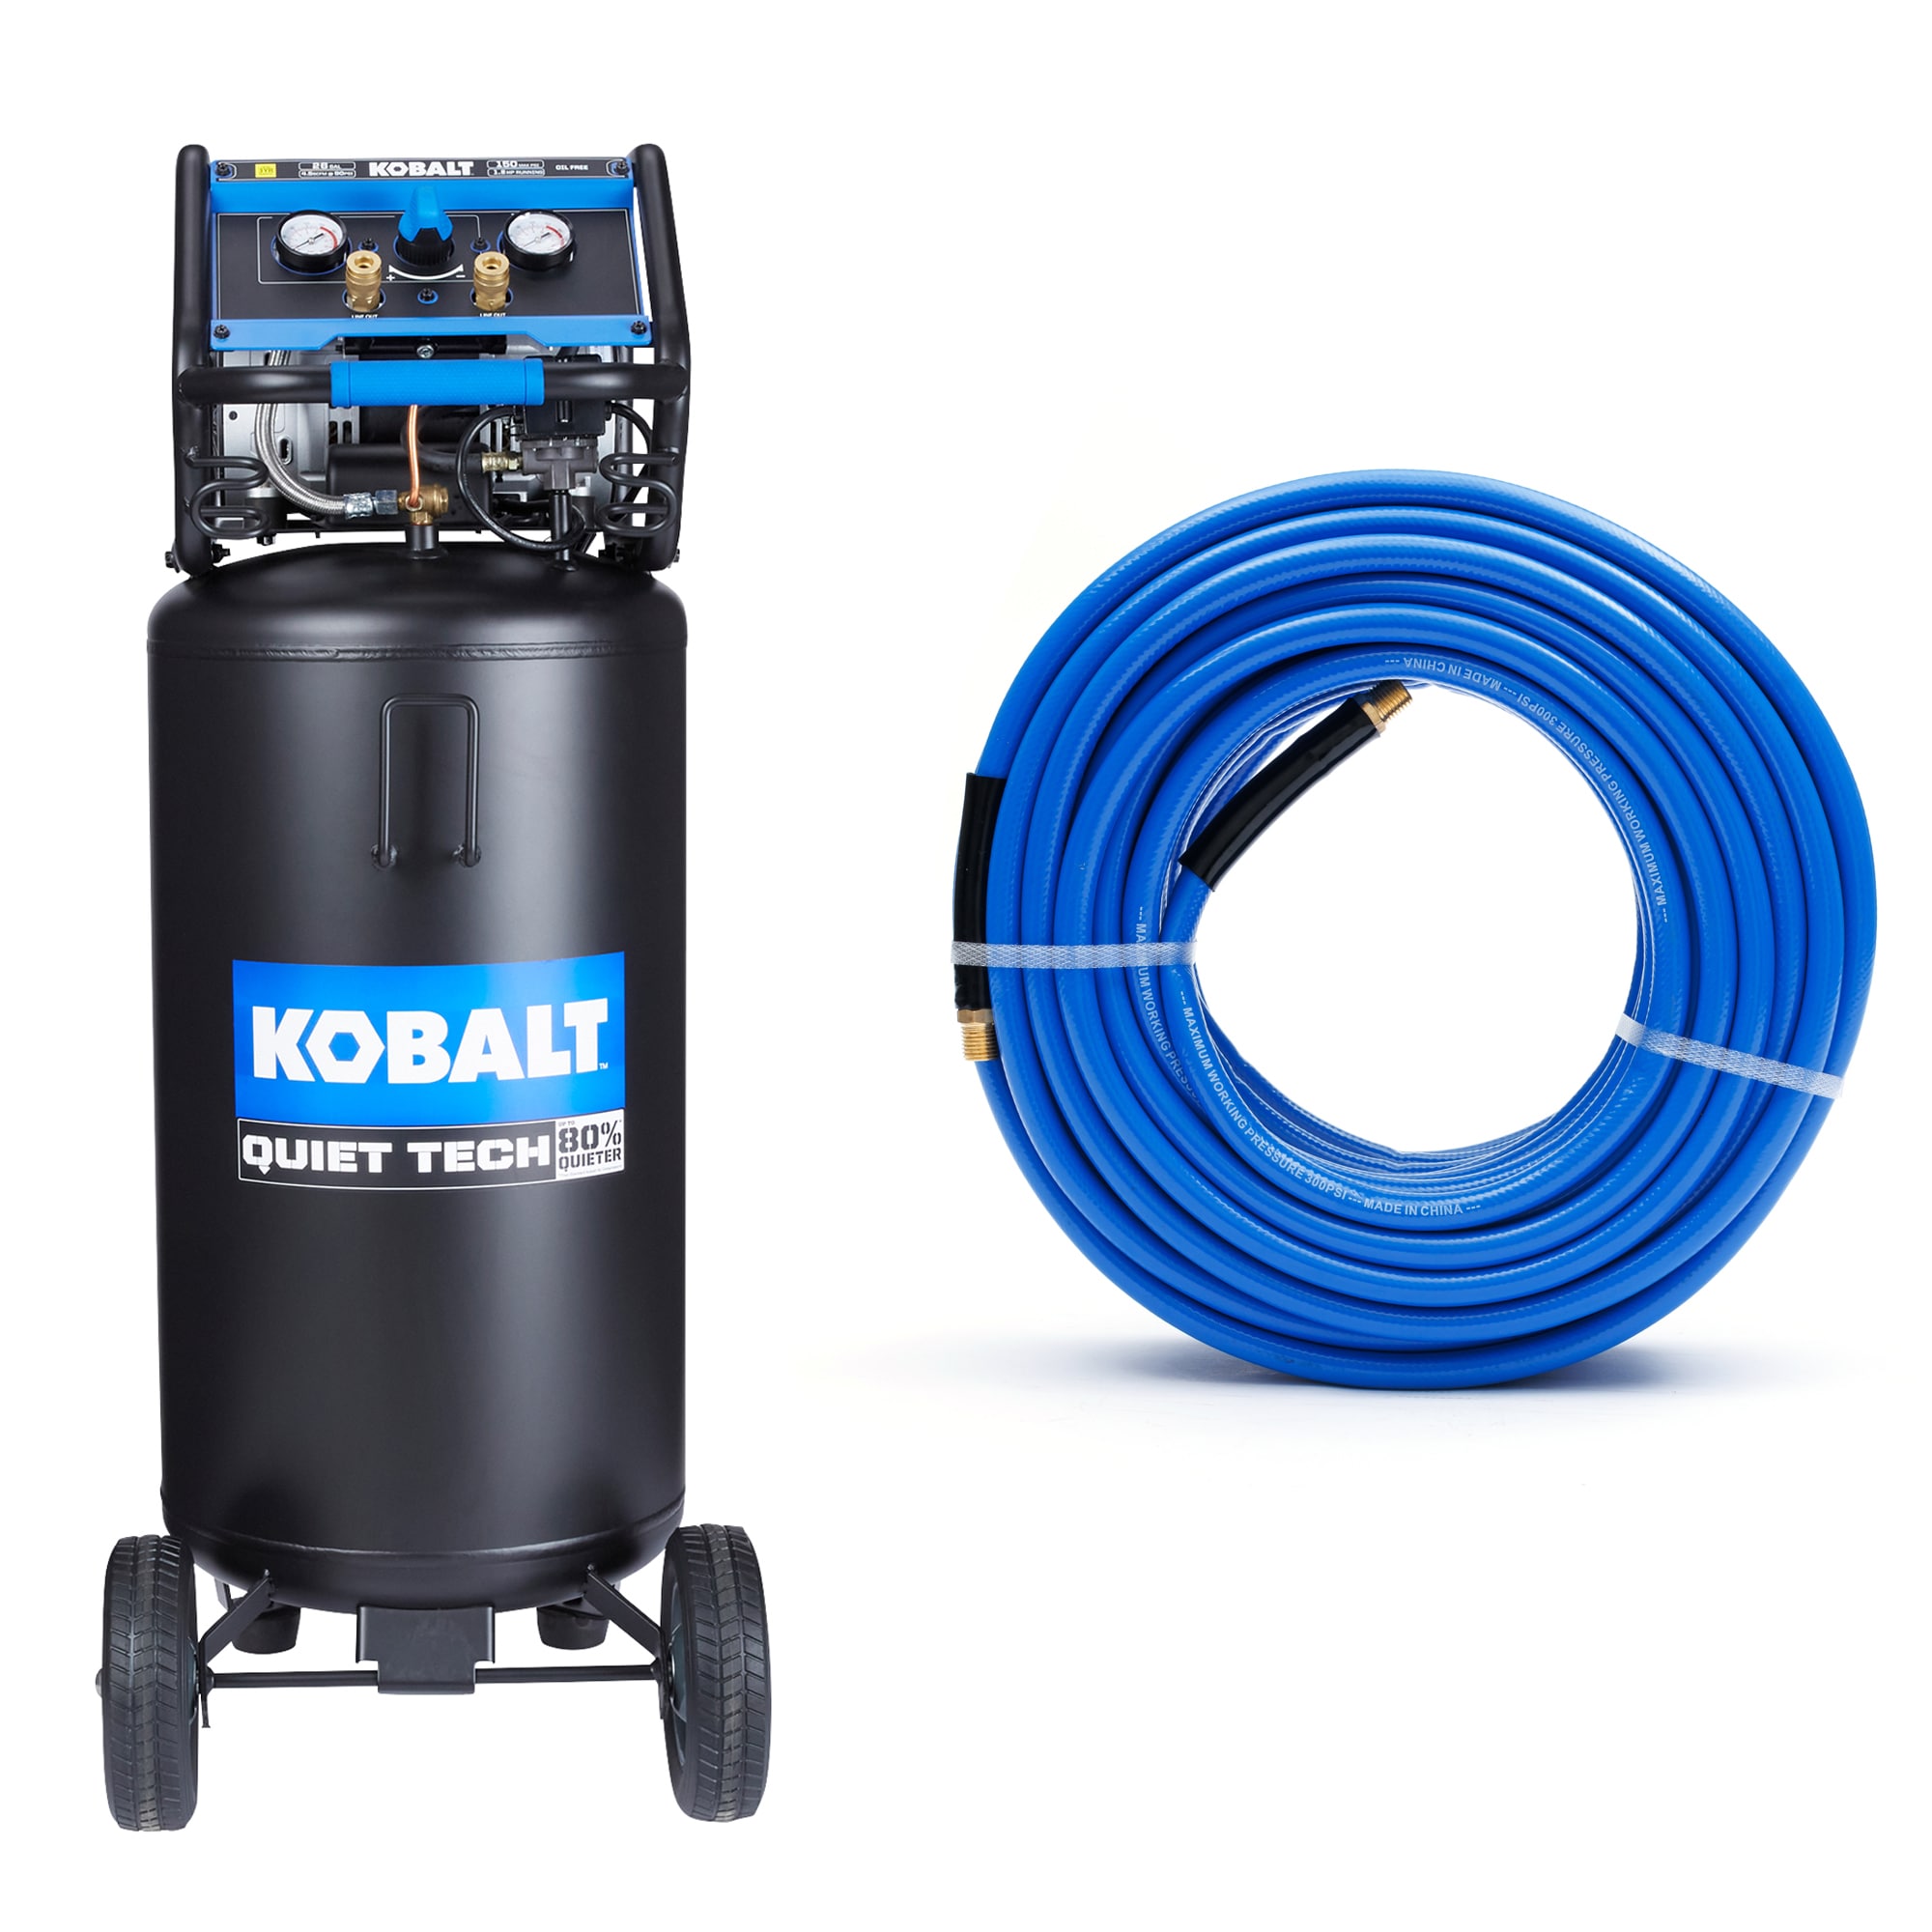 Kobalt 26-Gal Quiet Compressor and 3/8-IN x 50-FT PVC Air Hose